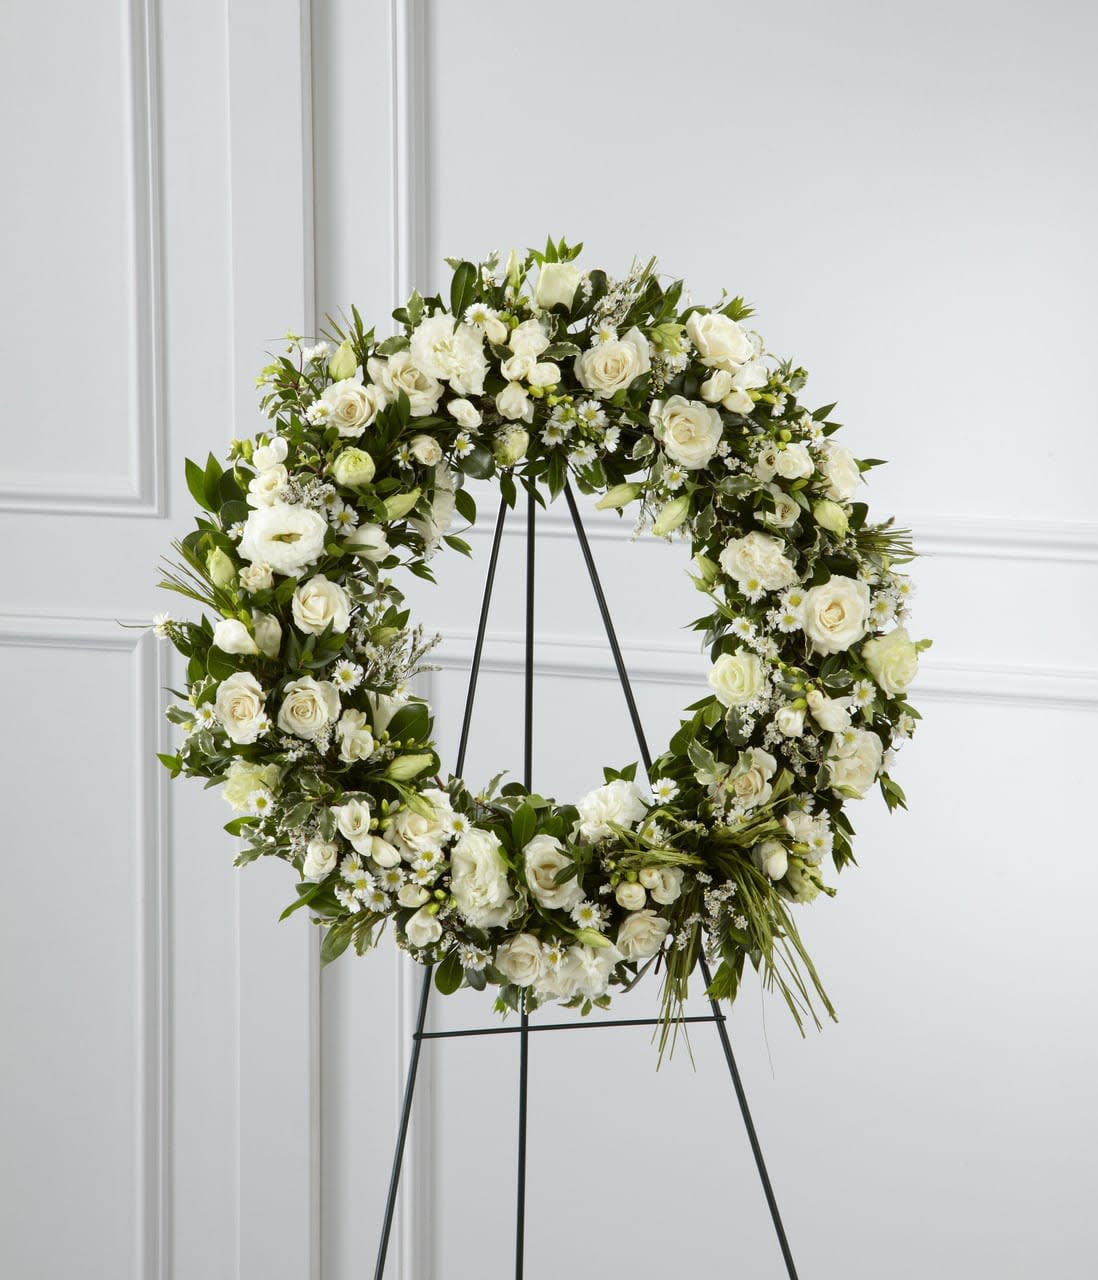 SAFF The Splendor Wreath - The Splendor Wreath is a symbol of lasting love and kinship, whether for the deceased or in comfort of those suffering from a loss. Elegant white freesia, double lisianthus, spray roses, Monte Casino asters and limonium are accented with a variety of lush greens and green raffia ribbon, perfectly arranged in the form of a wreath, to create a beautiful way to display your sincere sentiments. Approximately 22-inches in diameter.  Your purchase includes a complimentary personalized gift message.